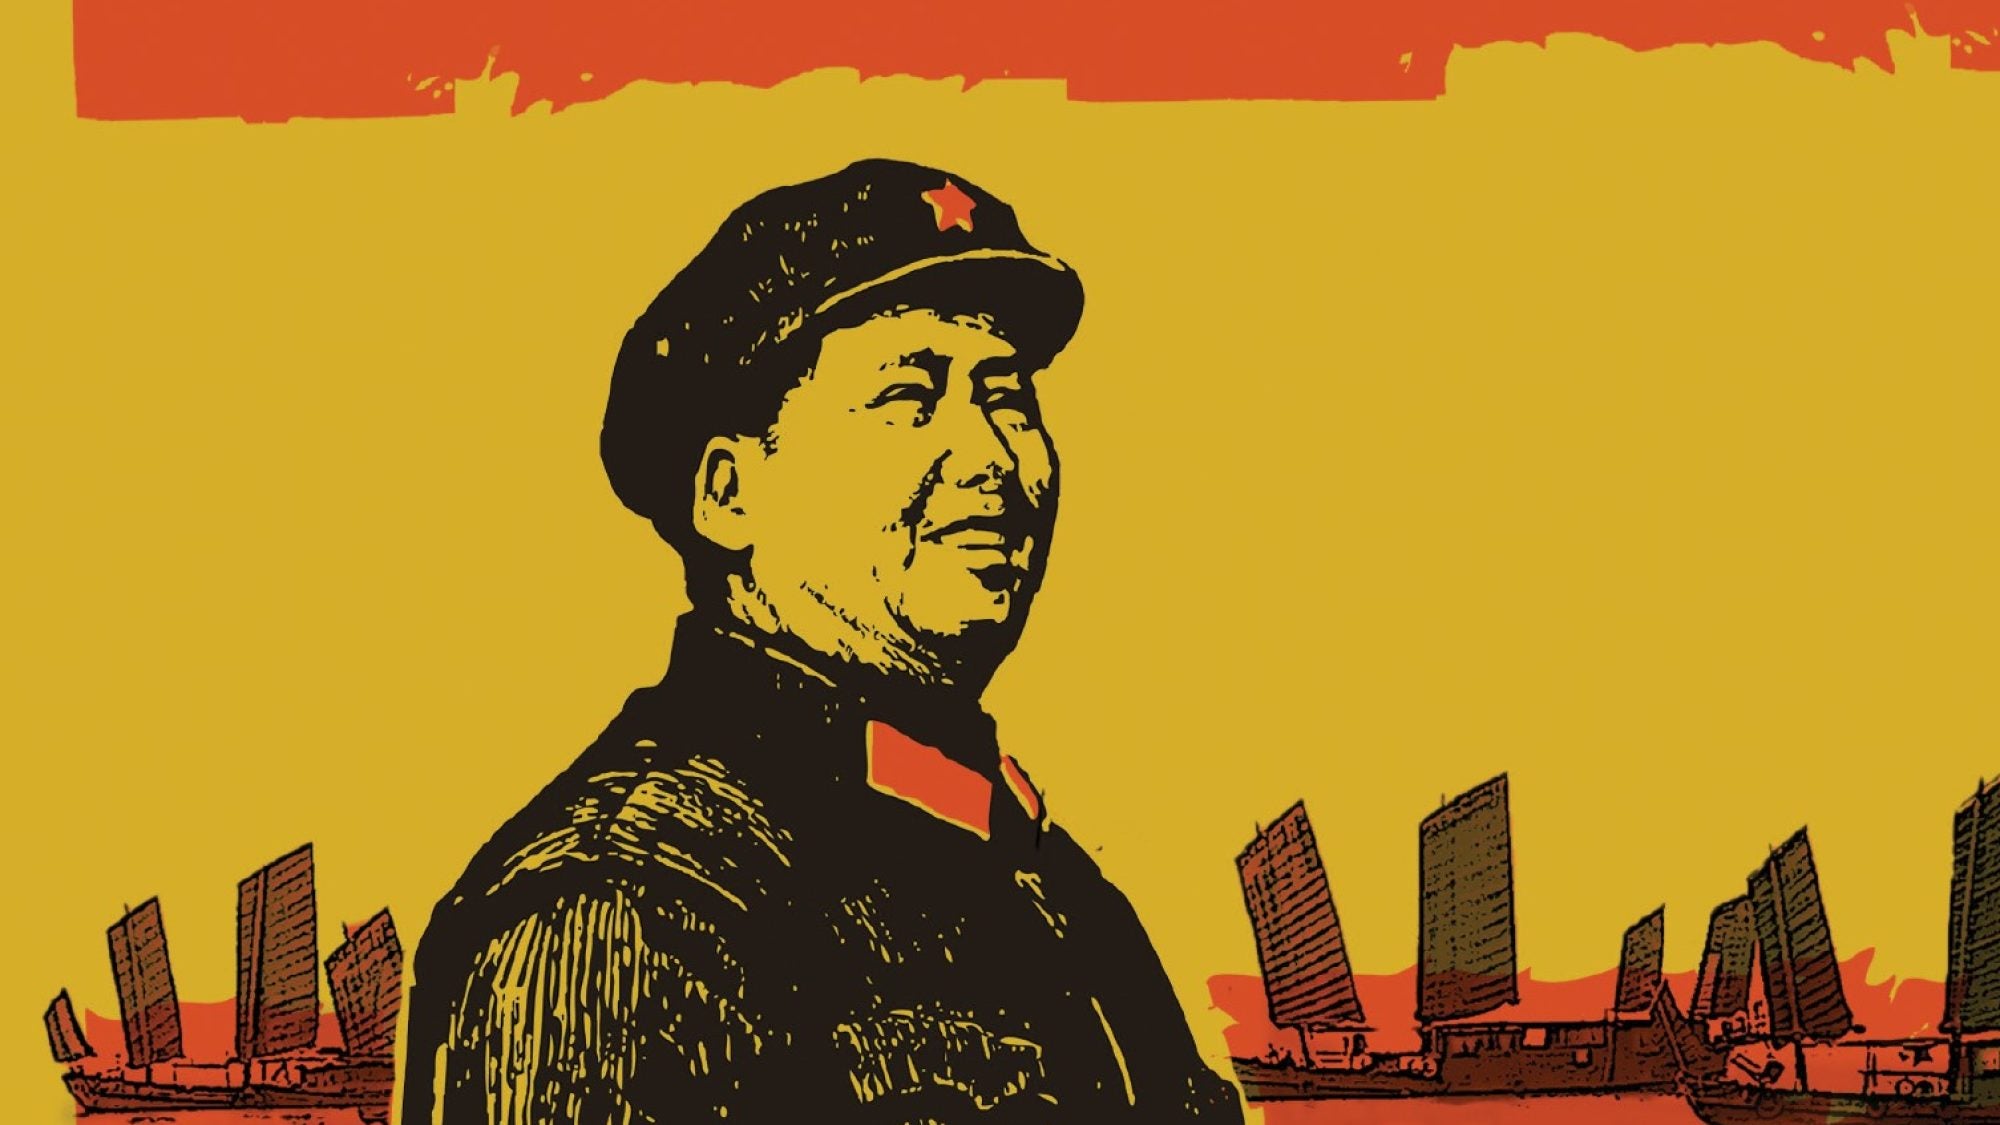 Colored graphic featuring screenprinted image of Mao.